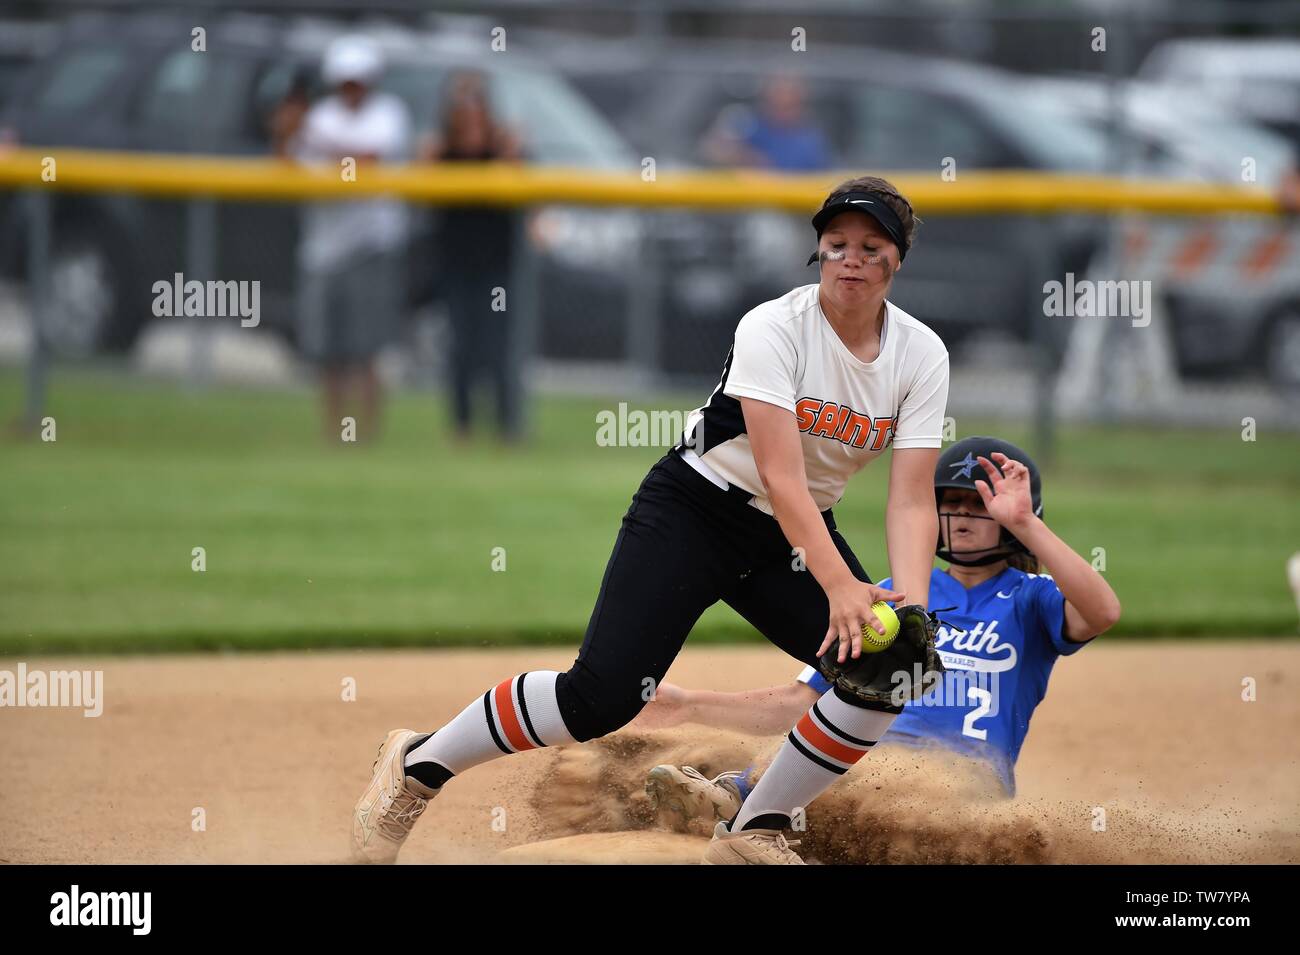 Batter/runner sliding in safely to second base with a double as an opposing infielder took a late throw at the bag. USA. Stock Photo